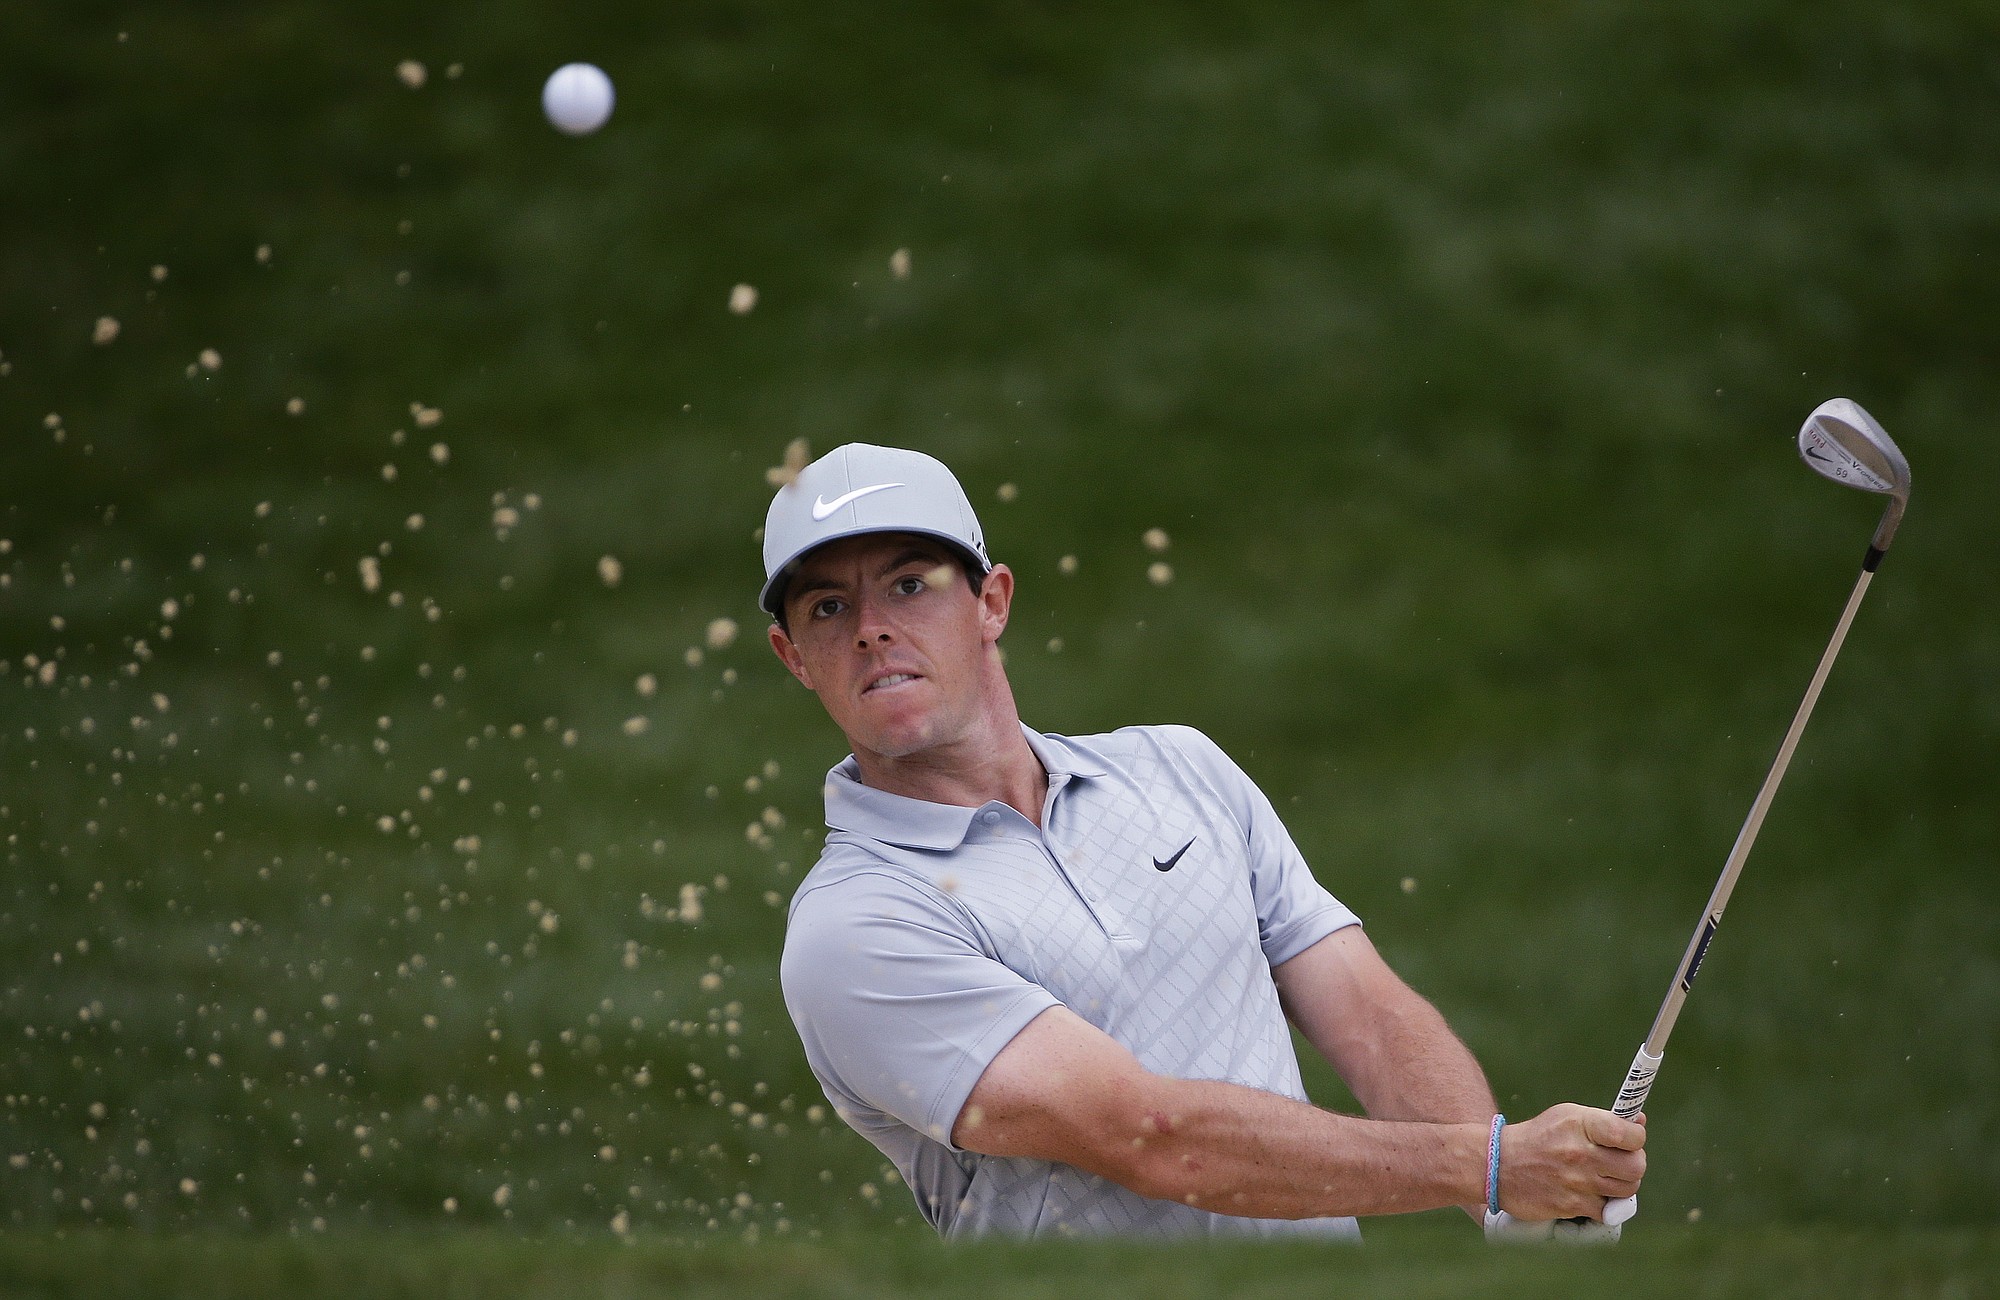 Rory McIlroy, of Northern Ireland, hits out of the bunker on the 12th hole during the second round of the PGA Championship golf tournament at Valhalla Golf Club on Friday, Aug. 8, 2014, in Louisville, Ky. (AP Photo/David J.